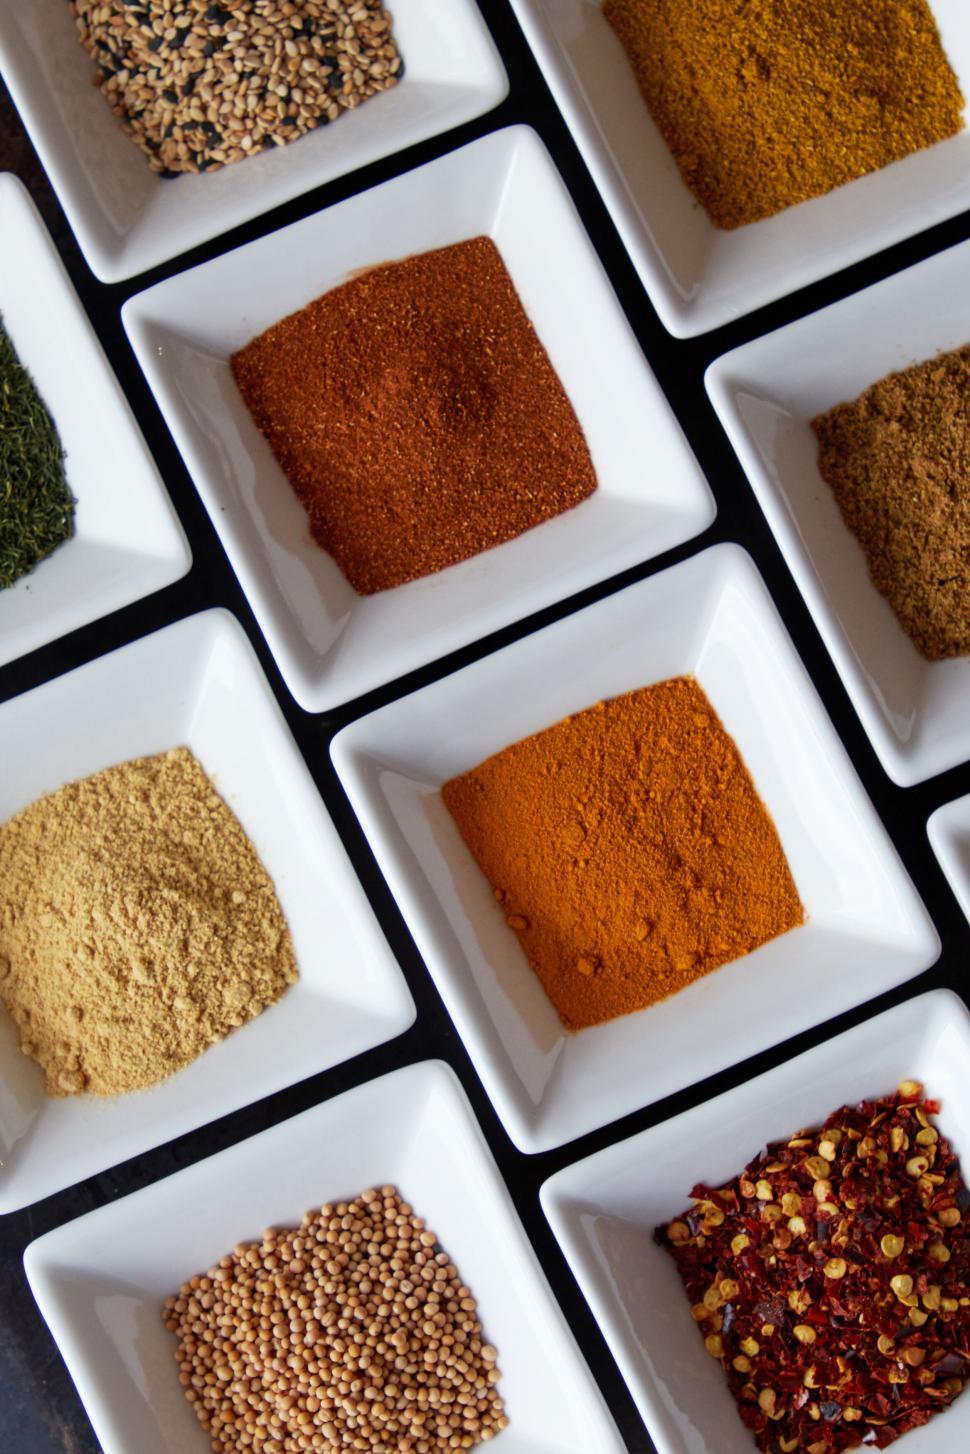 Free Image of Assorted spices in white square bowls 